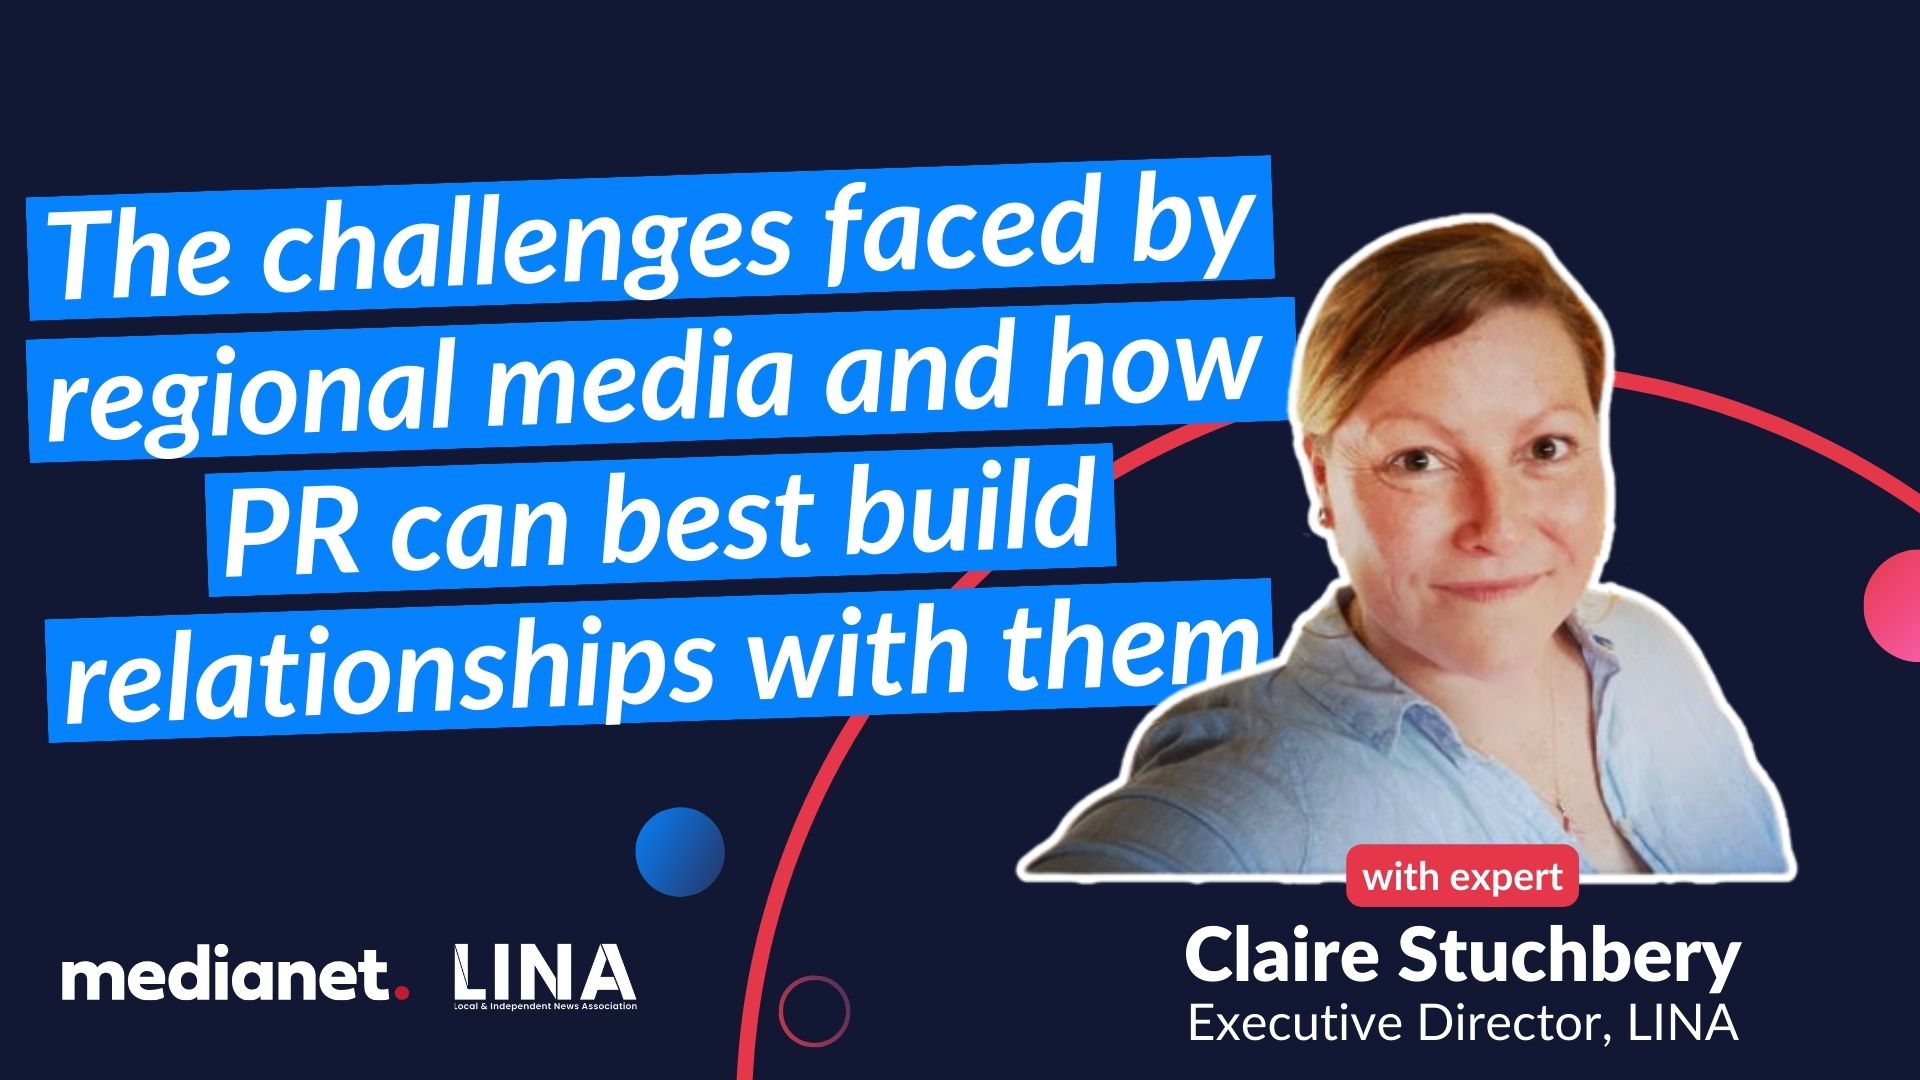 The challenges faced by regional media and how PR can best build relationships with them